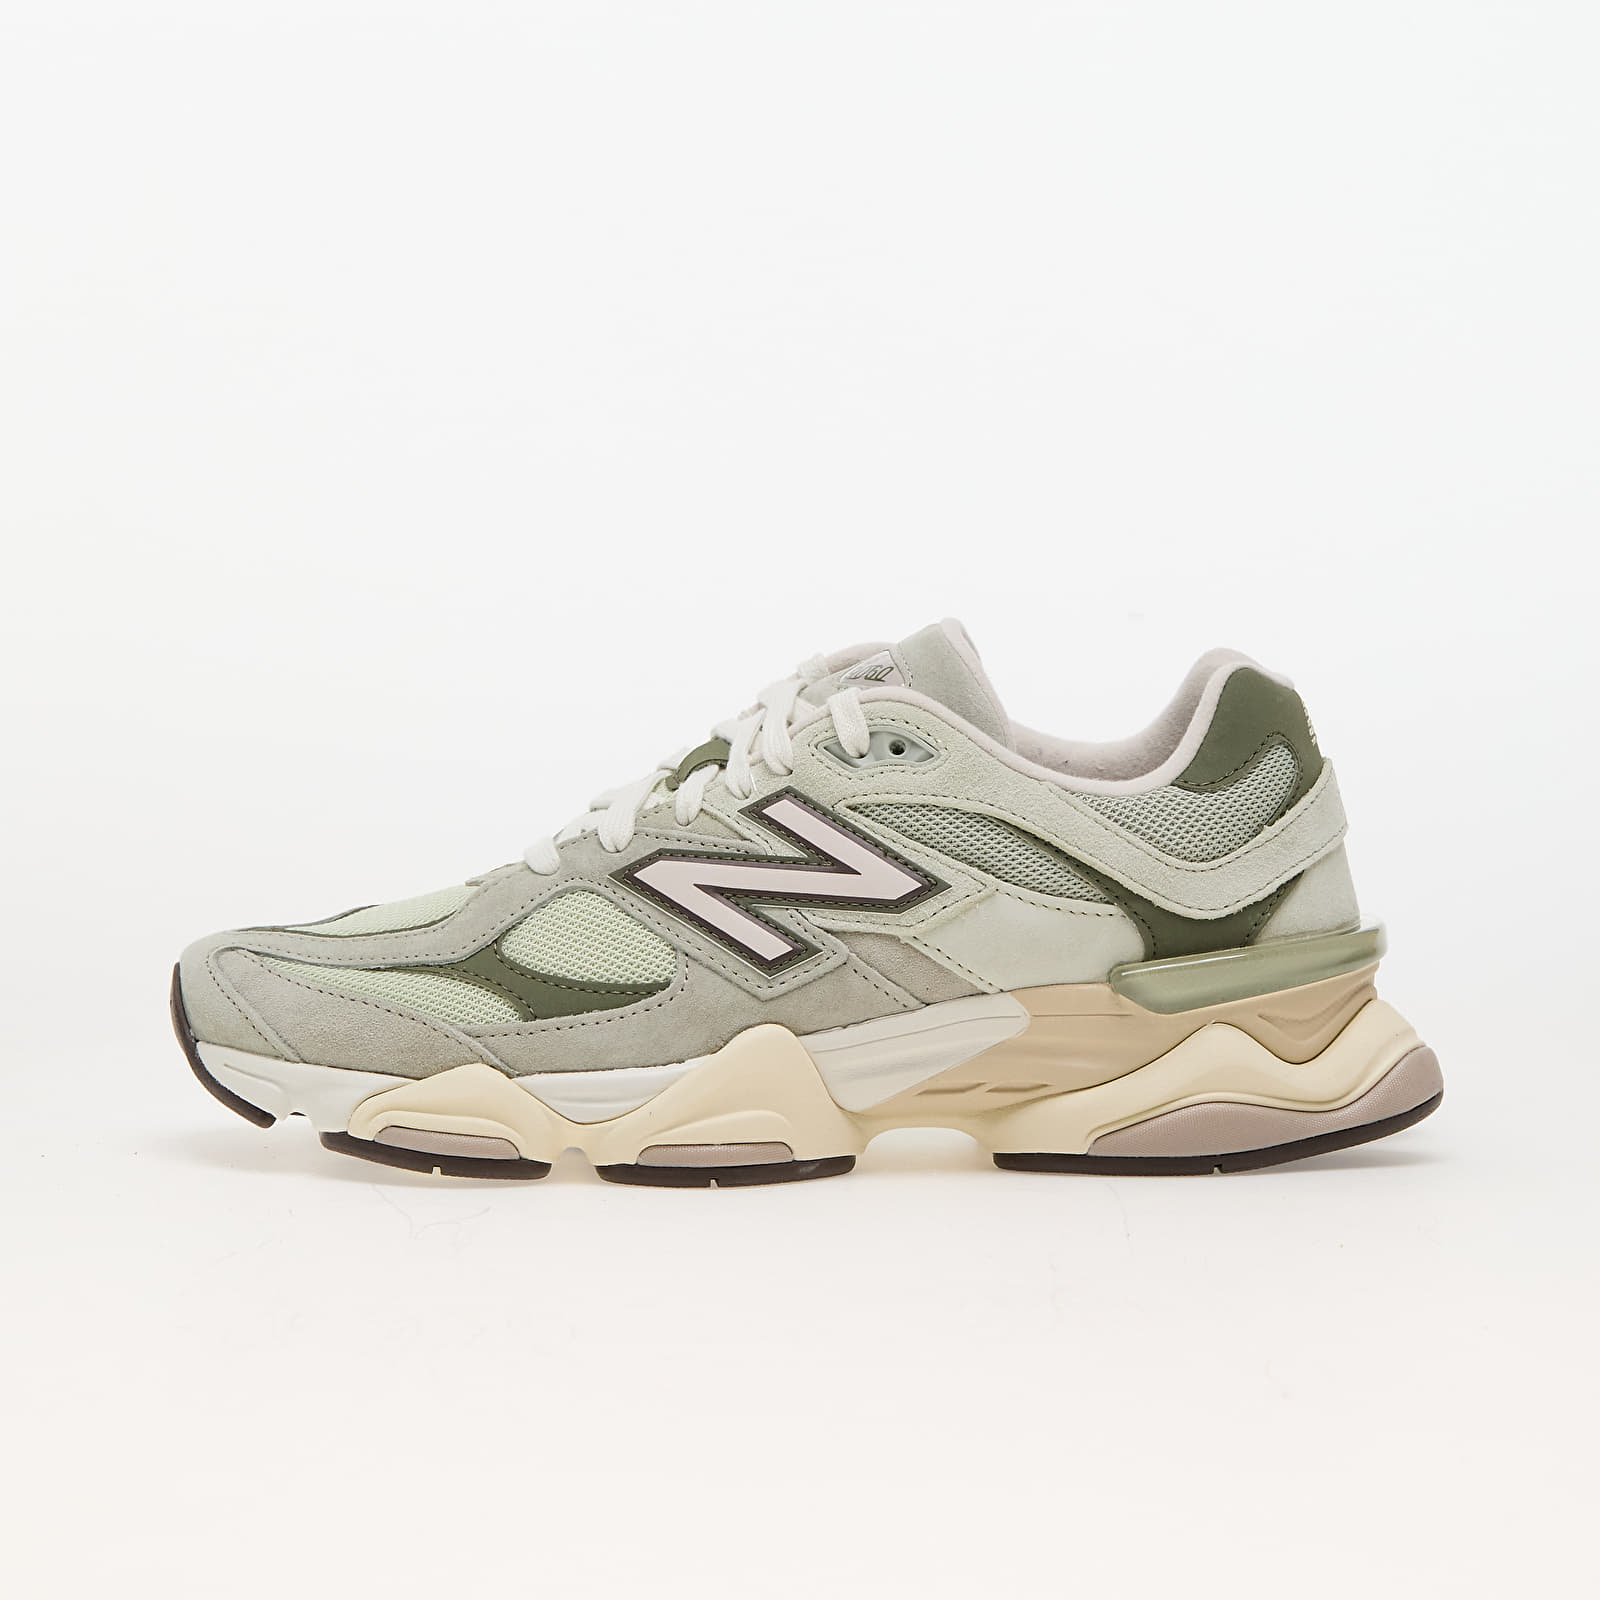 Men's sneakers and shoes New Balance 9060 Olivine